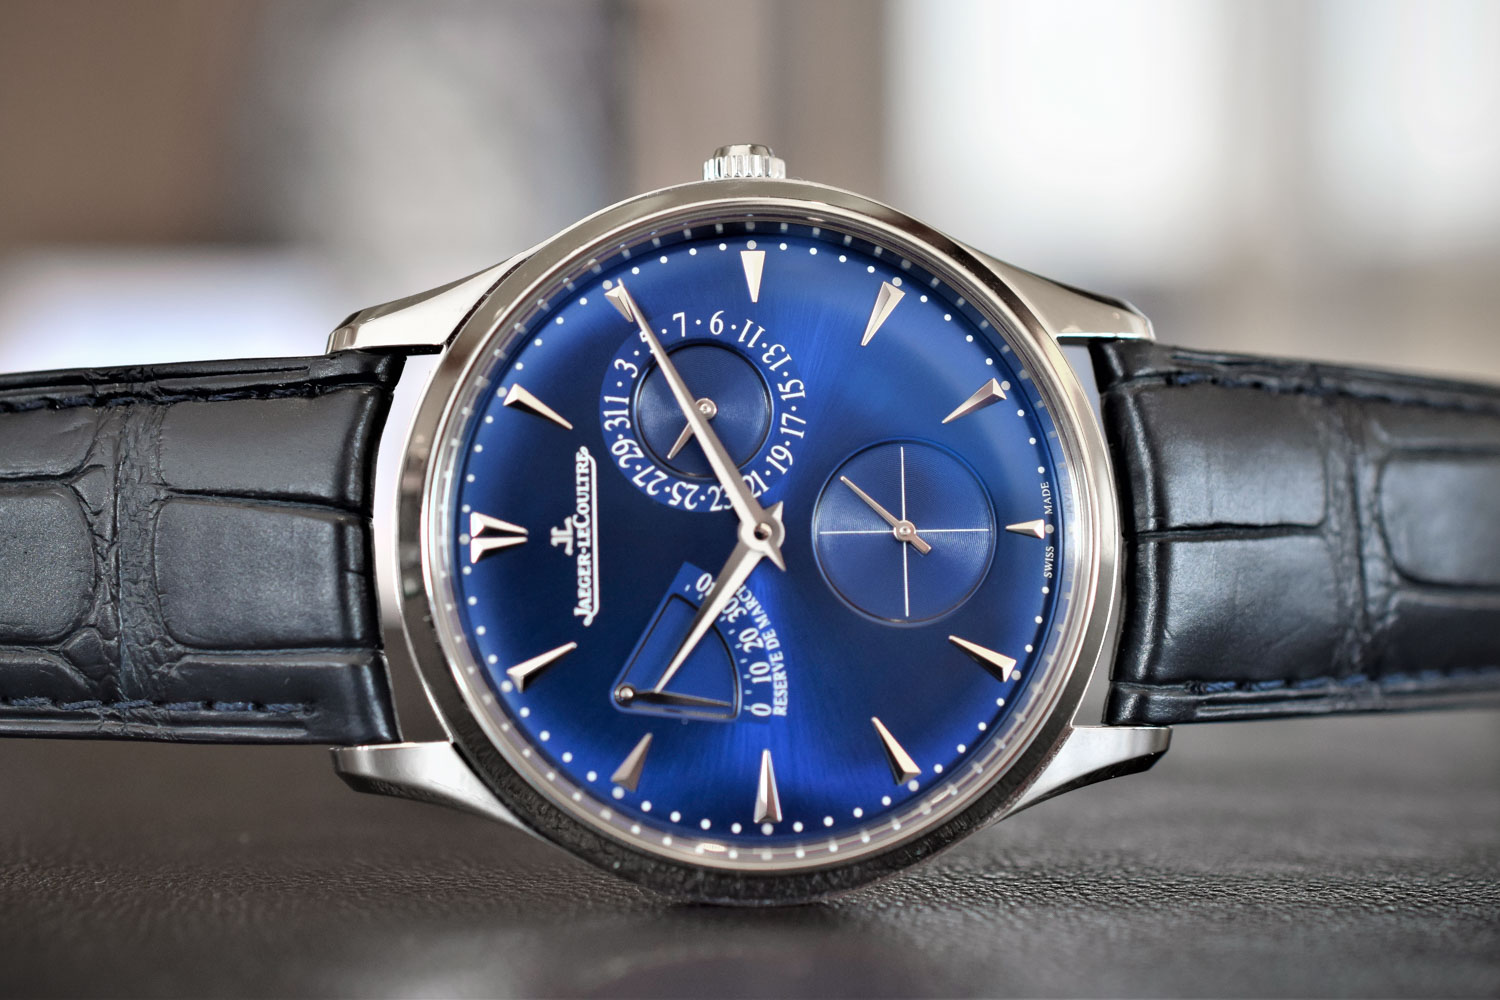 Jaeger-LeCoultre Master Ultra-Thin With Blue and Grey Dials For 2017 ...